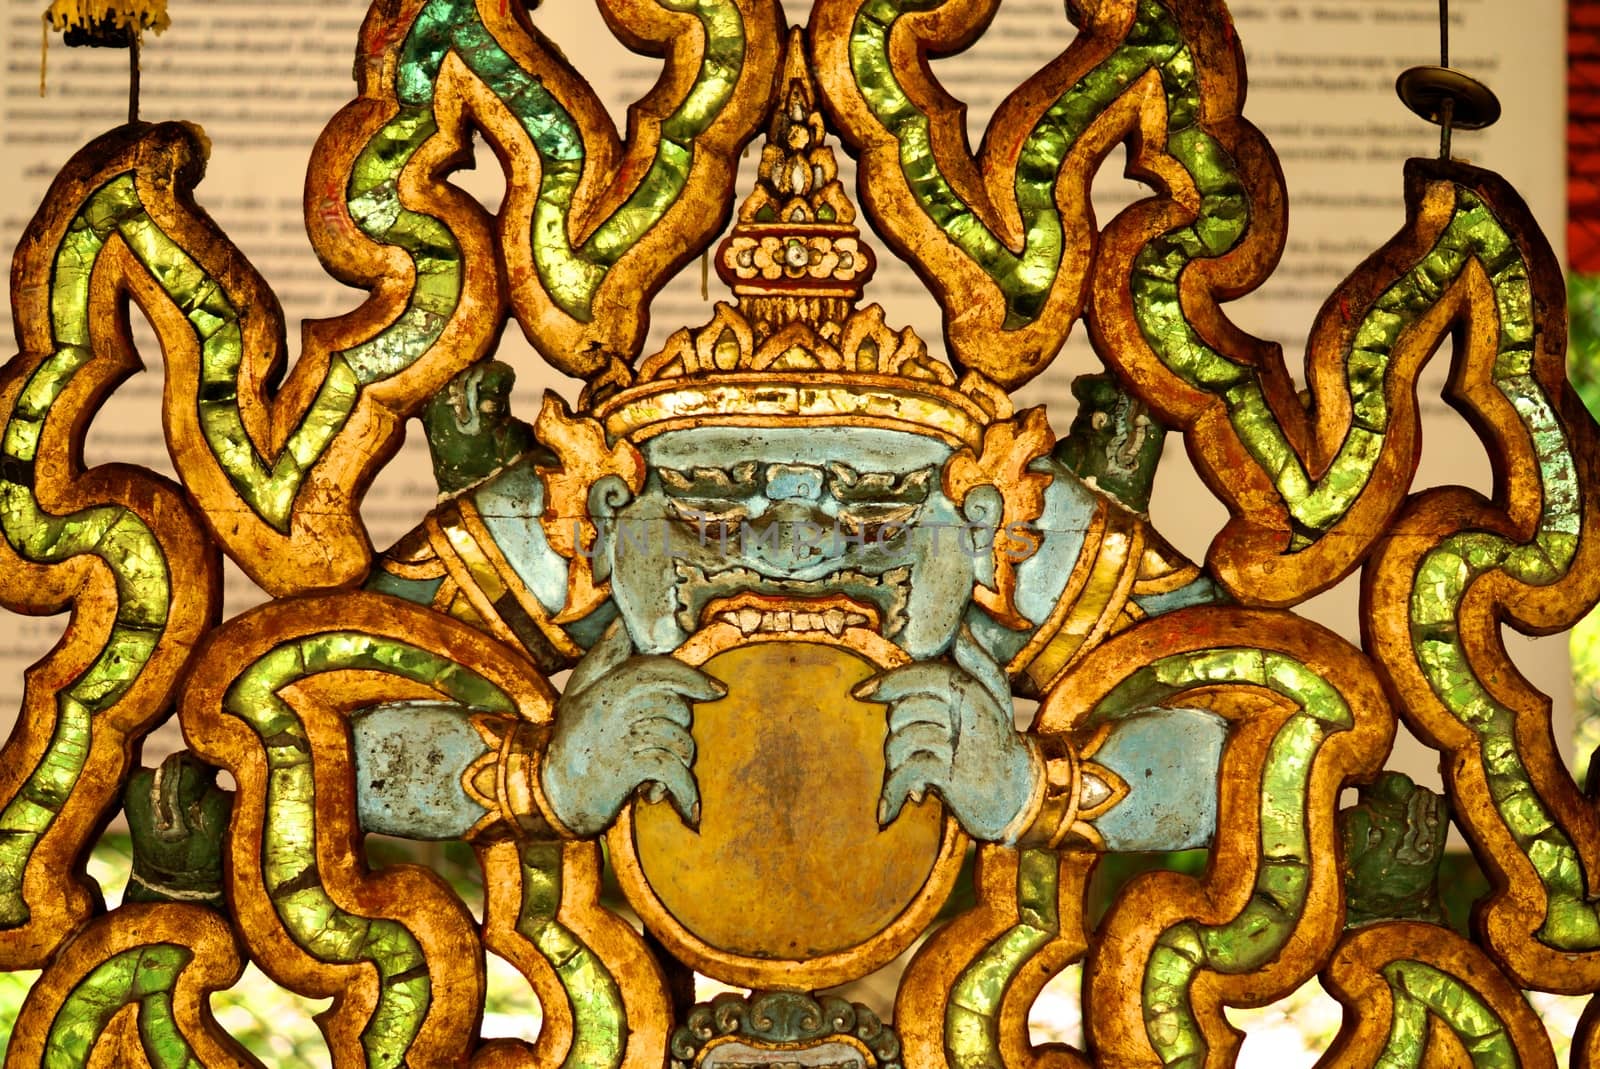 the detail of ancient thai decorated pattern that include handcraft wood carving work,gold painting and decorated with gold plate,mirror and precious stone,Lampang temple,Thailand